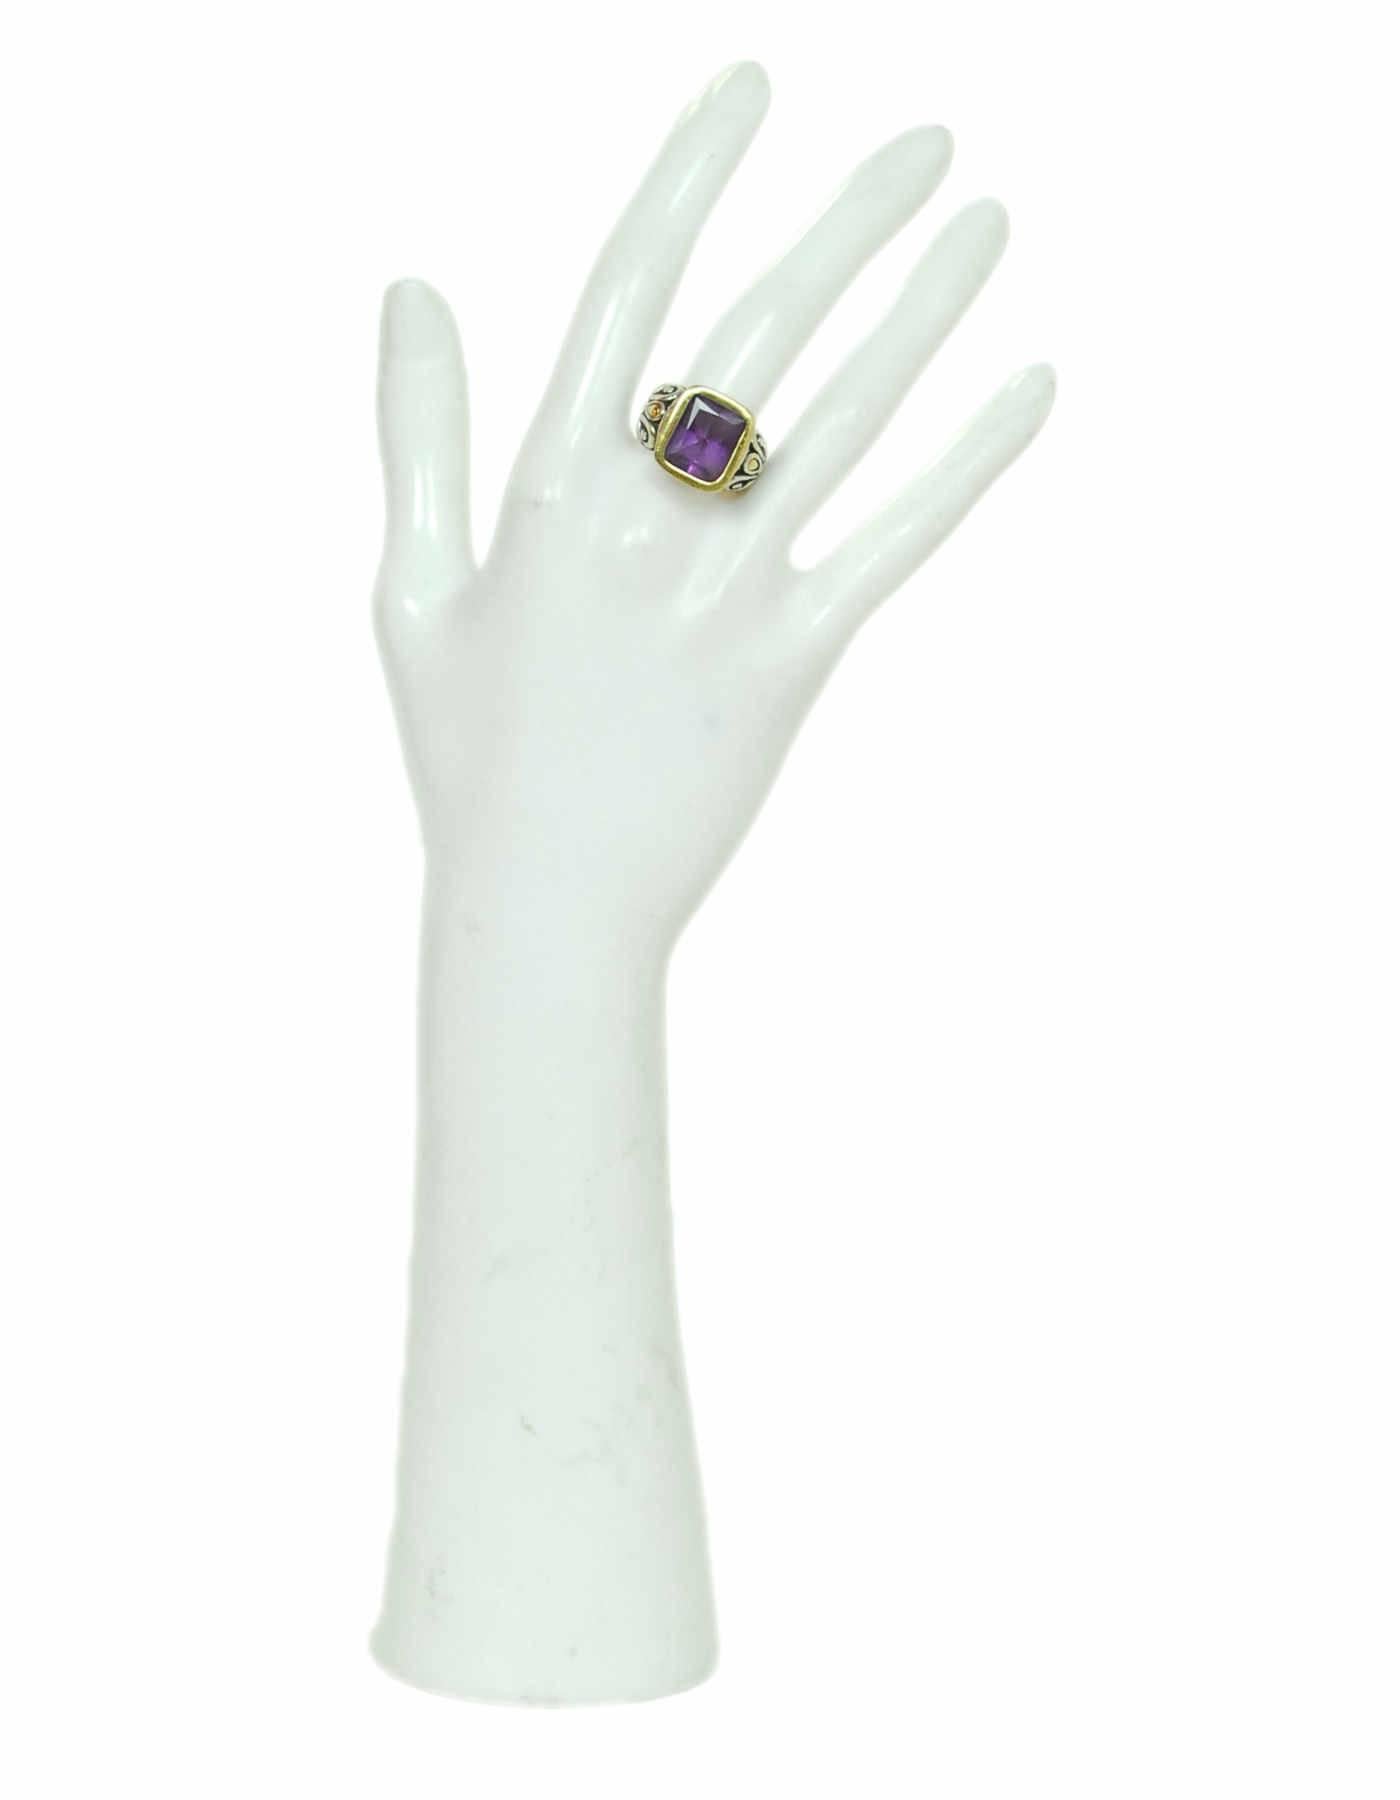 John Hardy Sterling, 18k Gold & Amethyst Ring Sz 6.5

Made In: Thailand
Color: Silver, gold, purple
Materials: Stering silver, 18k gold, amethyst
Stamp: 18K 925 Thailand
Overall Condition: Very good pre-owned condition with the exception of light